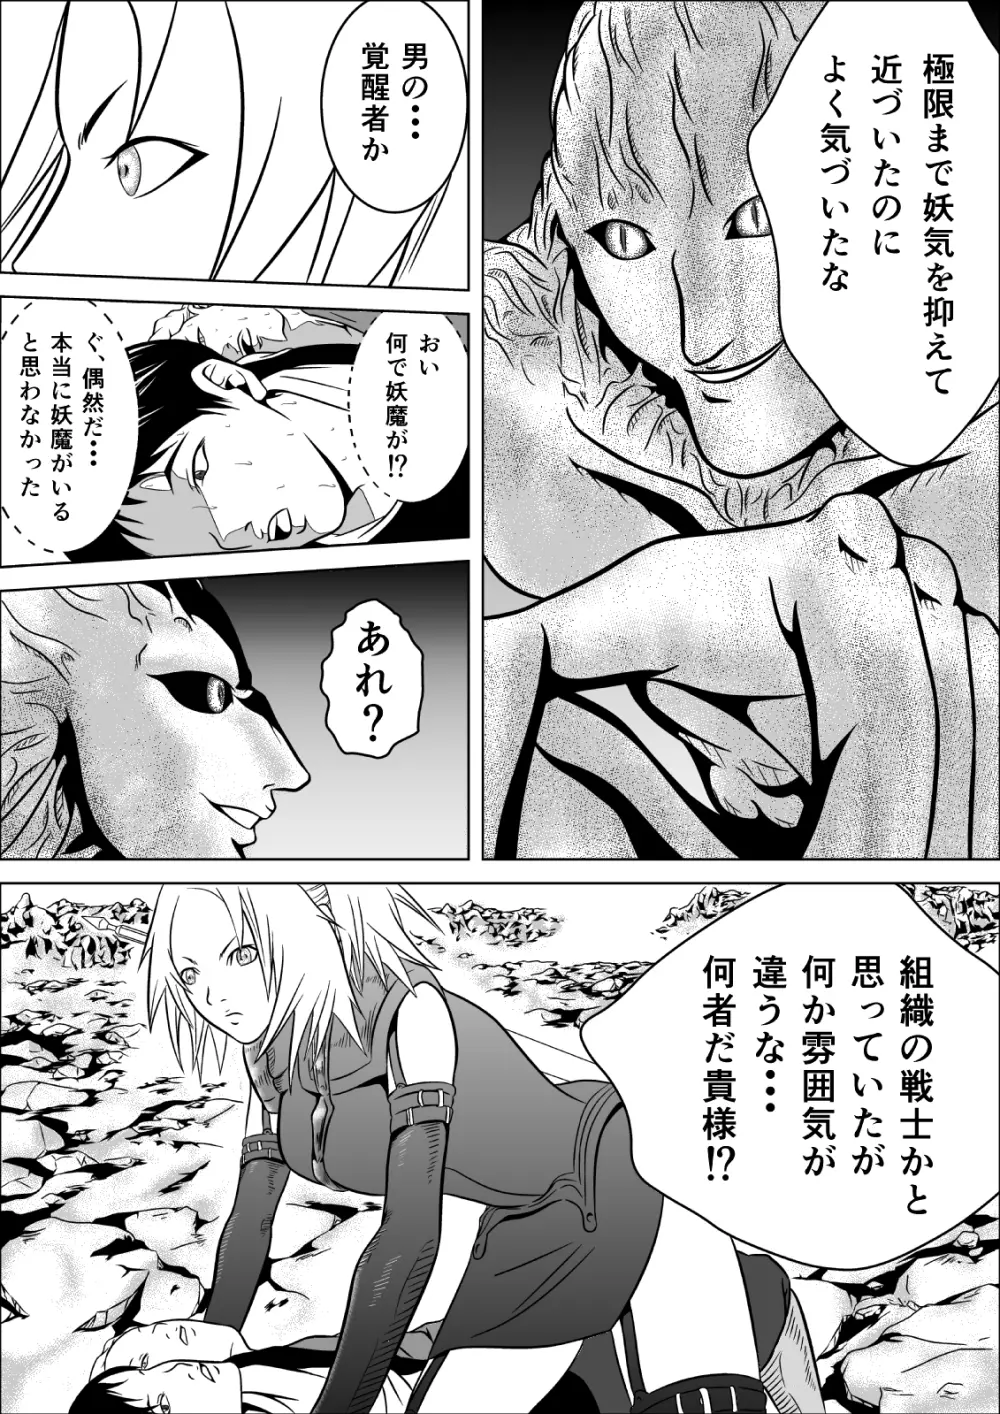 Ce0 嵌められた幻影 - page9